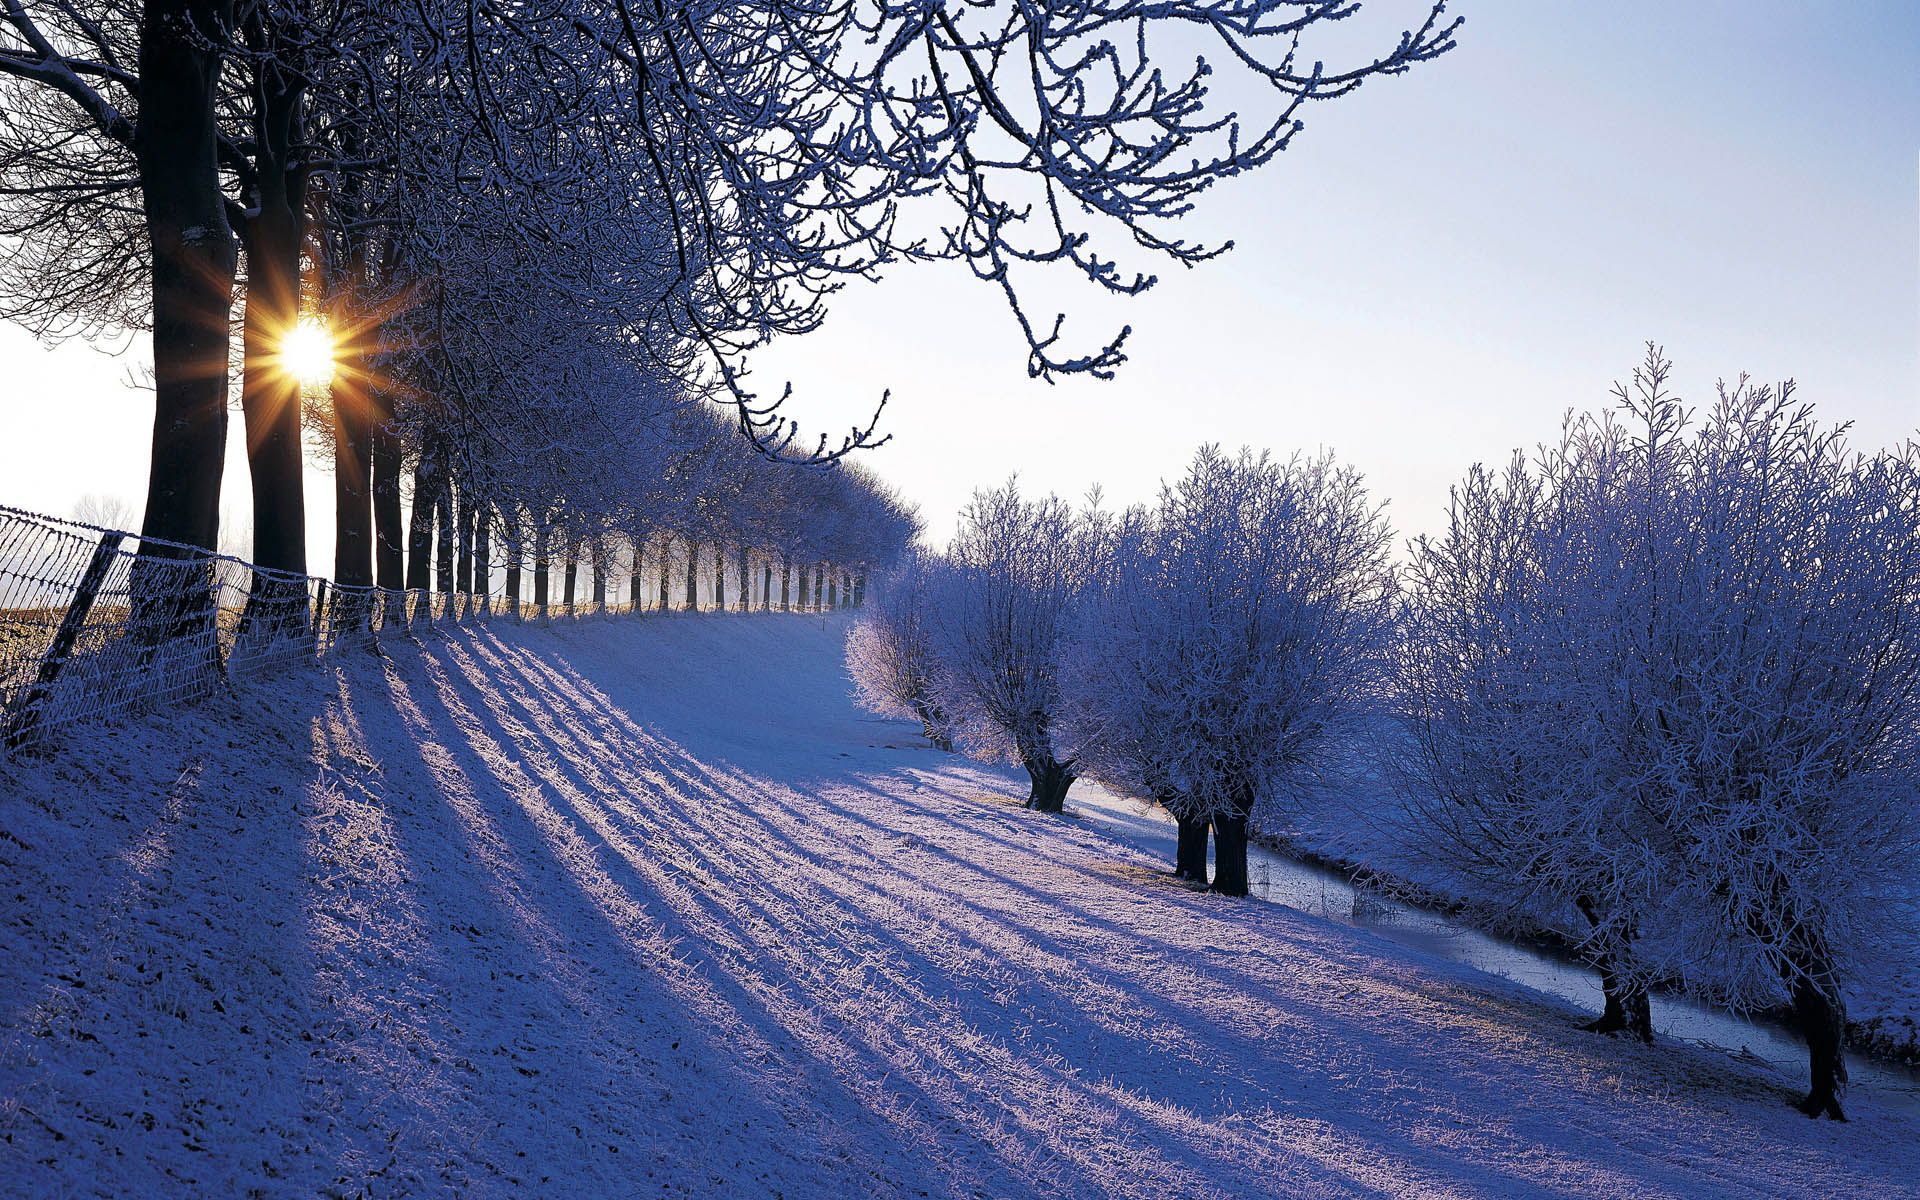 Winter Snow Wallpapers | Wallpapers, Backgrounds, Images, Art Photos.